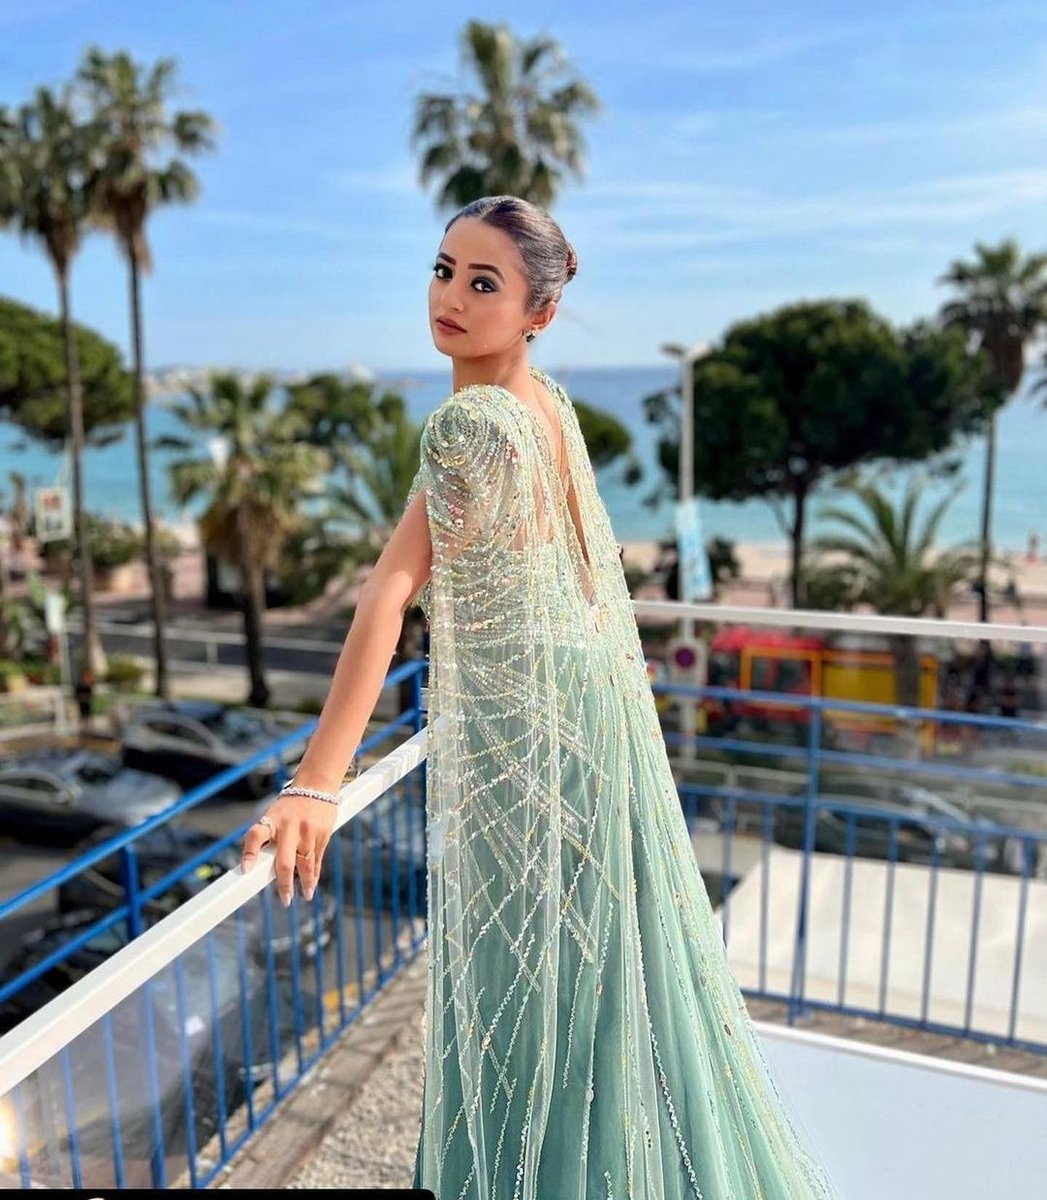 Cannes Film Festival is around the corner ❤️✨💫👸🏼 

Throwback to last year glamorous red carpet looks ✨
#ZiadNakad #Cannes #cannesfilmfestival #redcarpet #redcarpetfashion #redcarpetstyle #redcarpetlook #celebrities #hellyshah